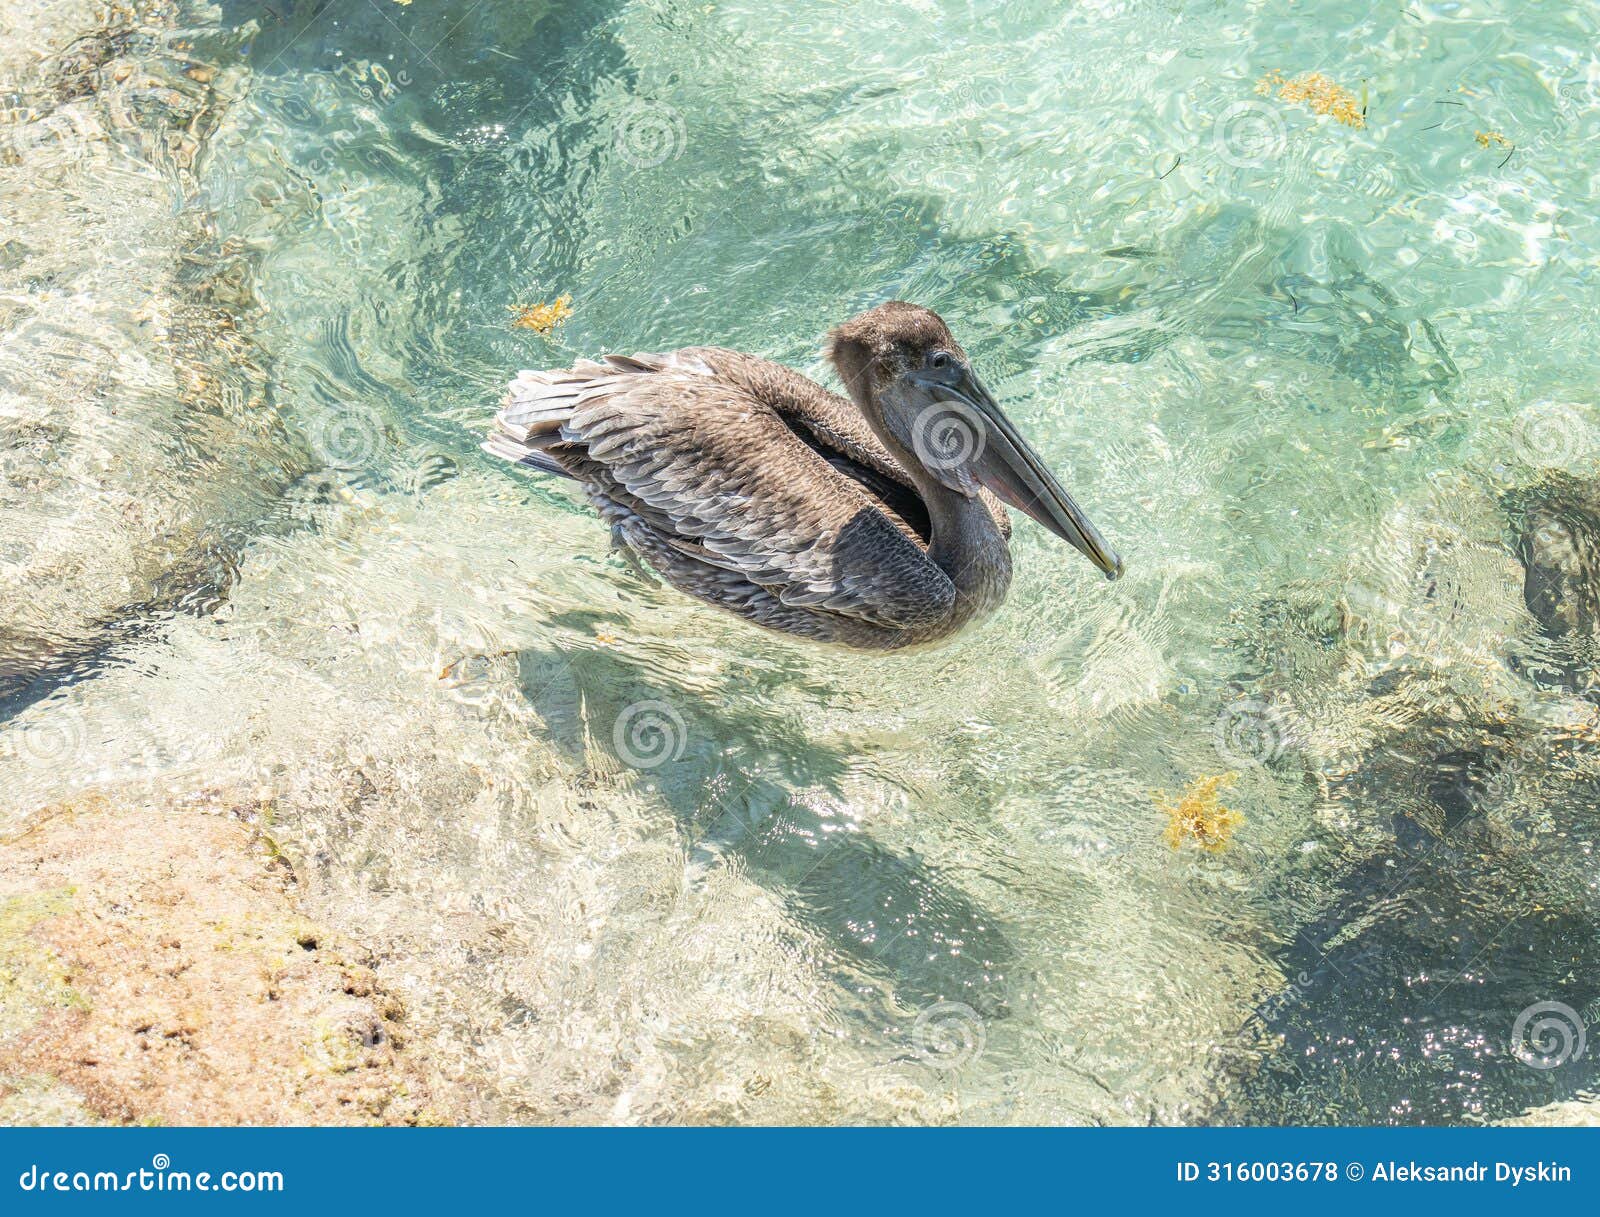 pelicans at bal harbour beach in miami, florida. clear skies and crystal clear ocean water